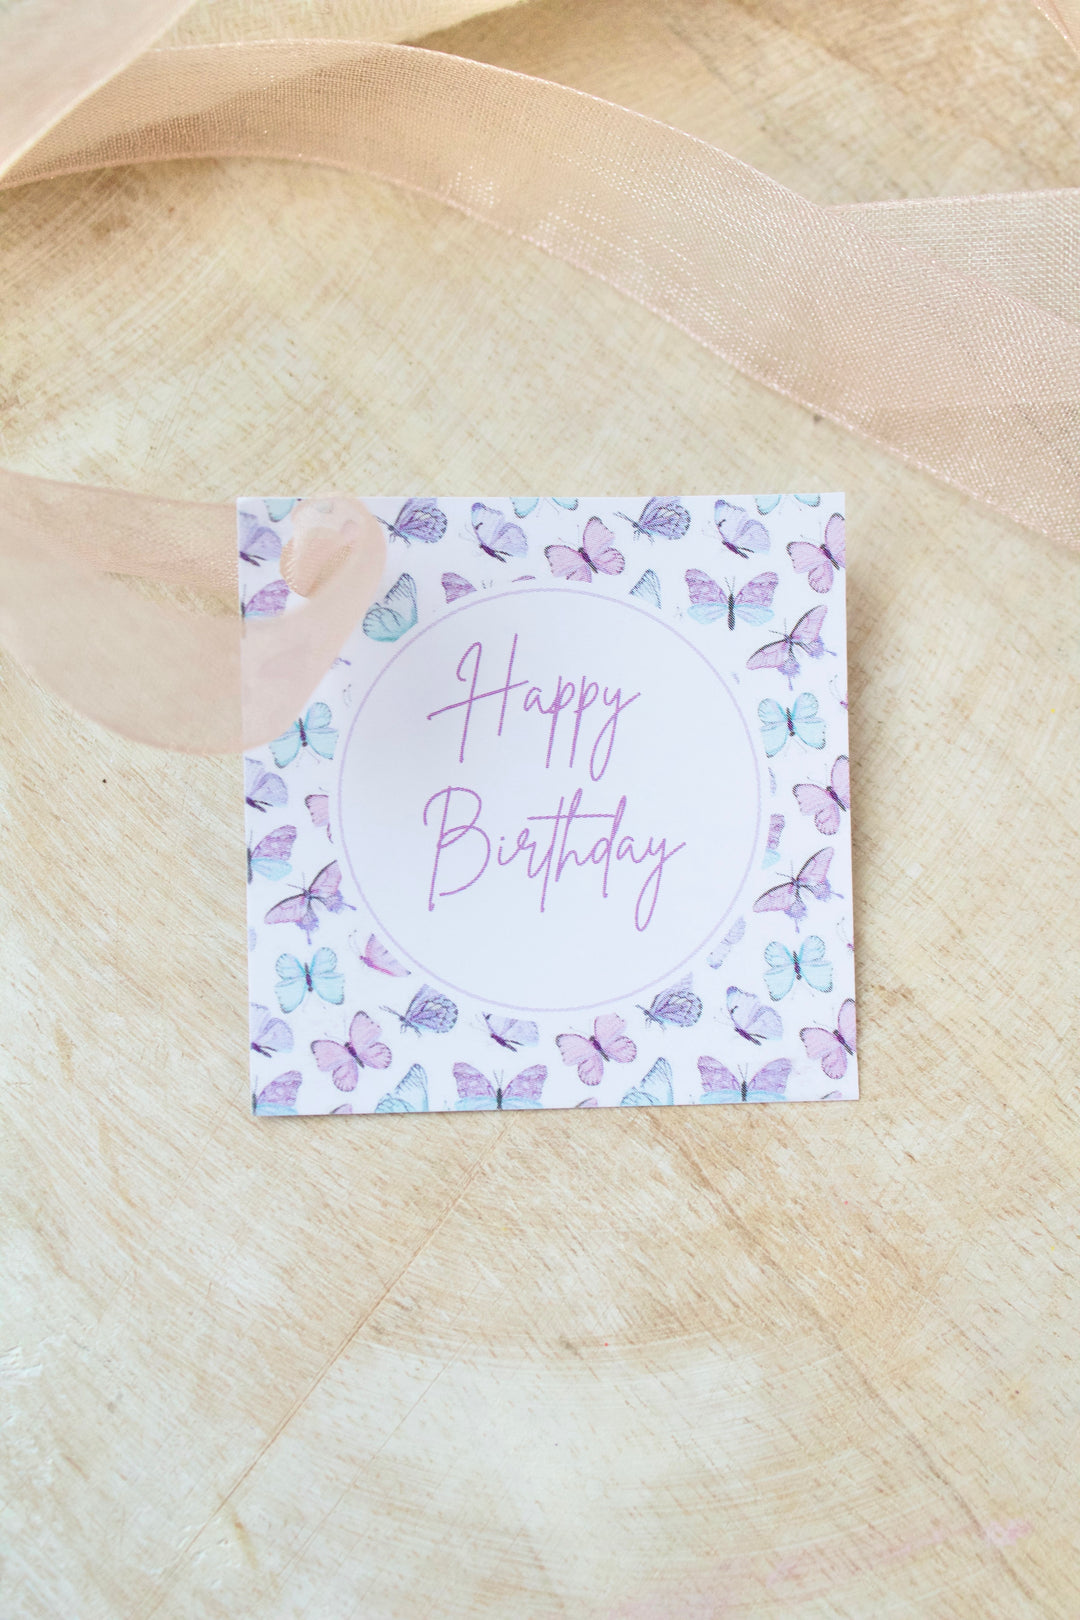 Happy Birthday butterflies - tags for cookies - 25pcs - WITHOUT HOLES